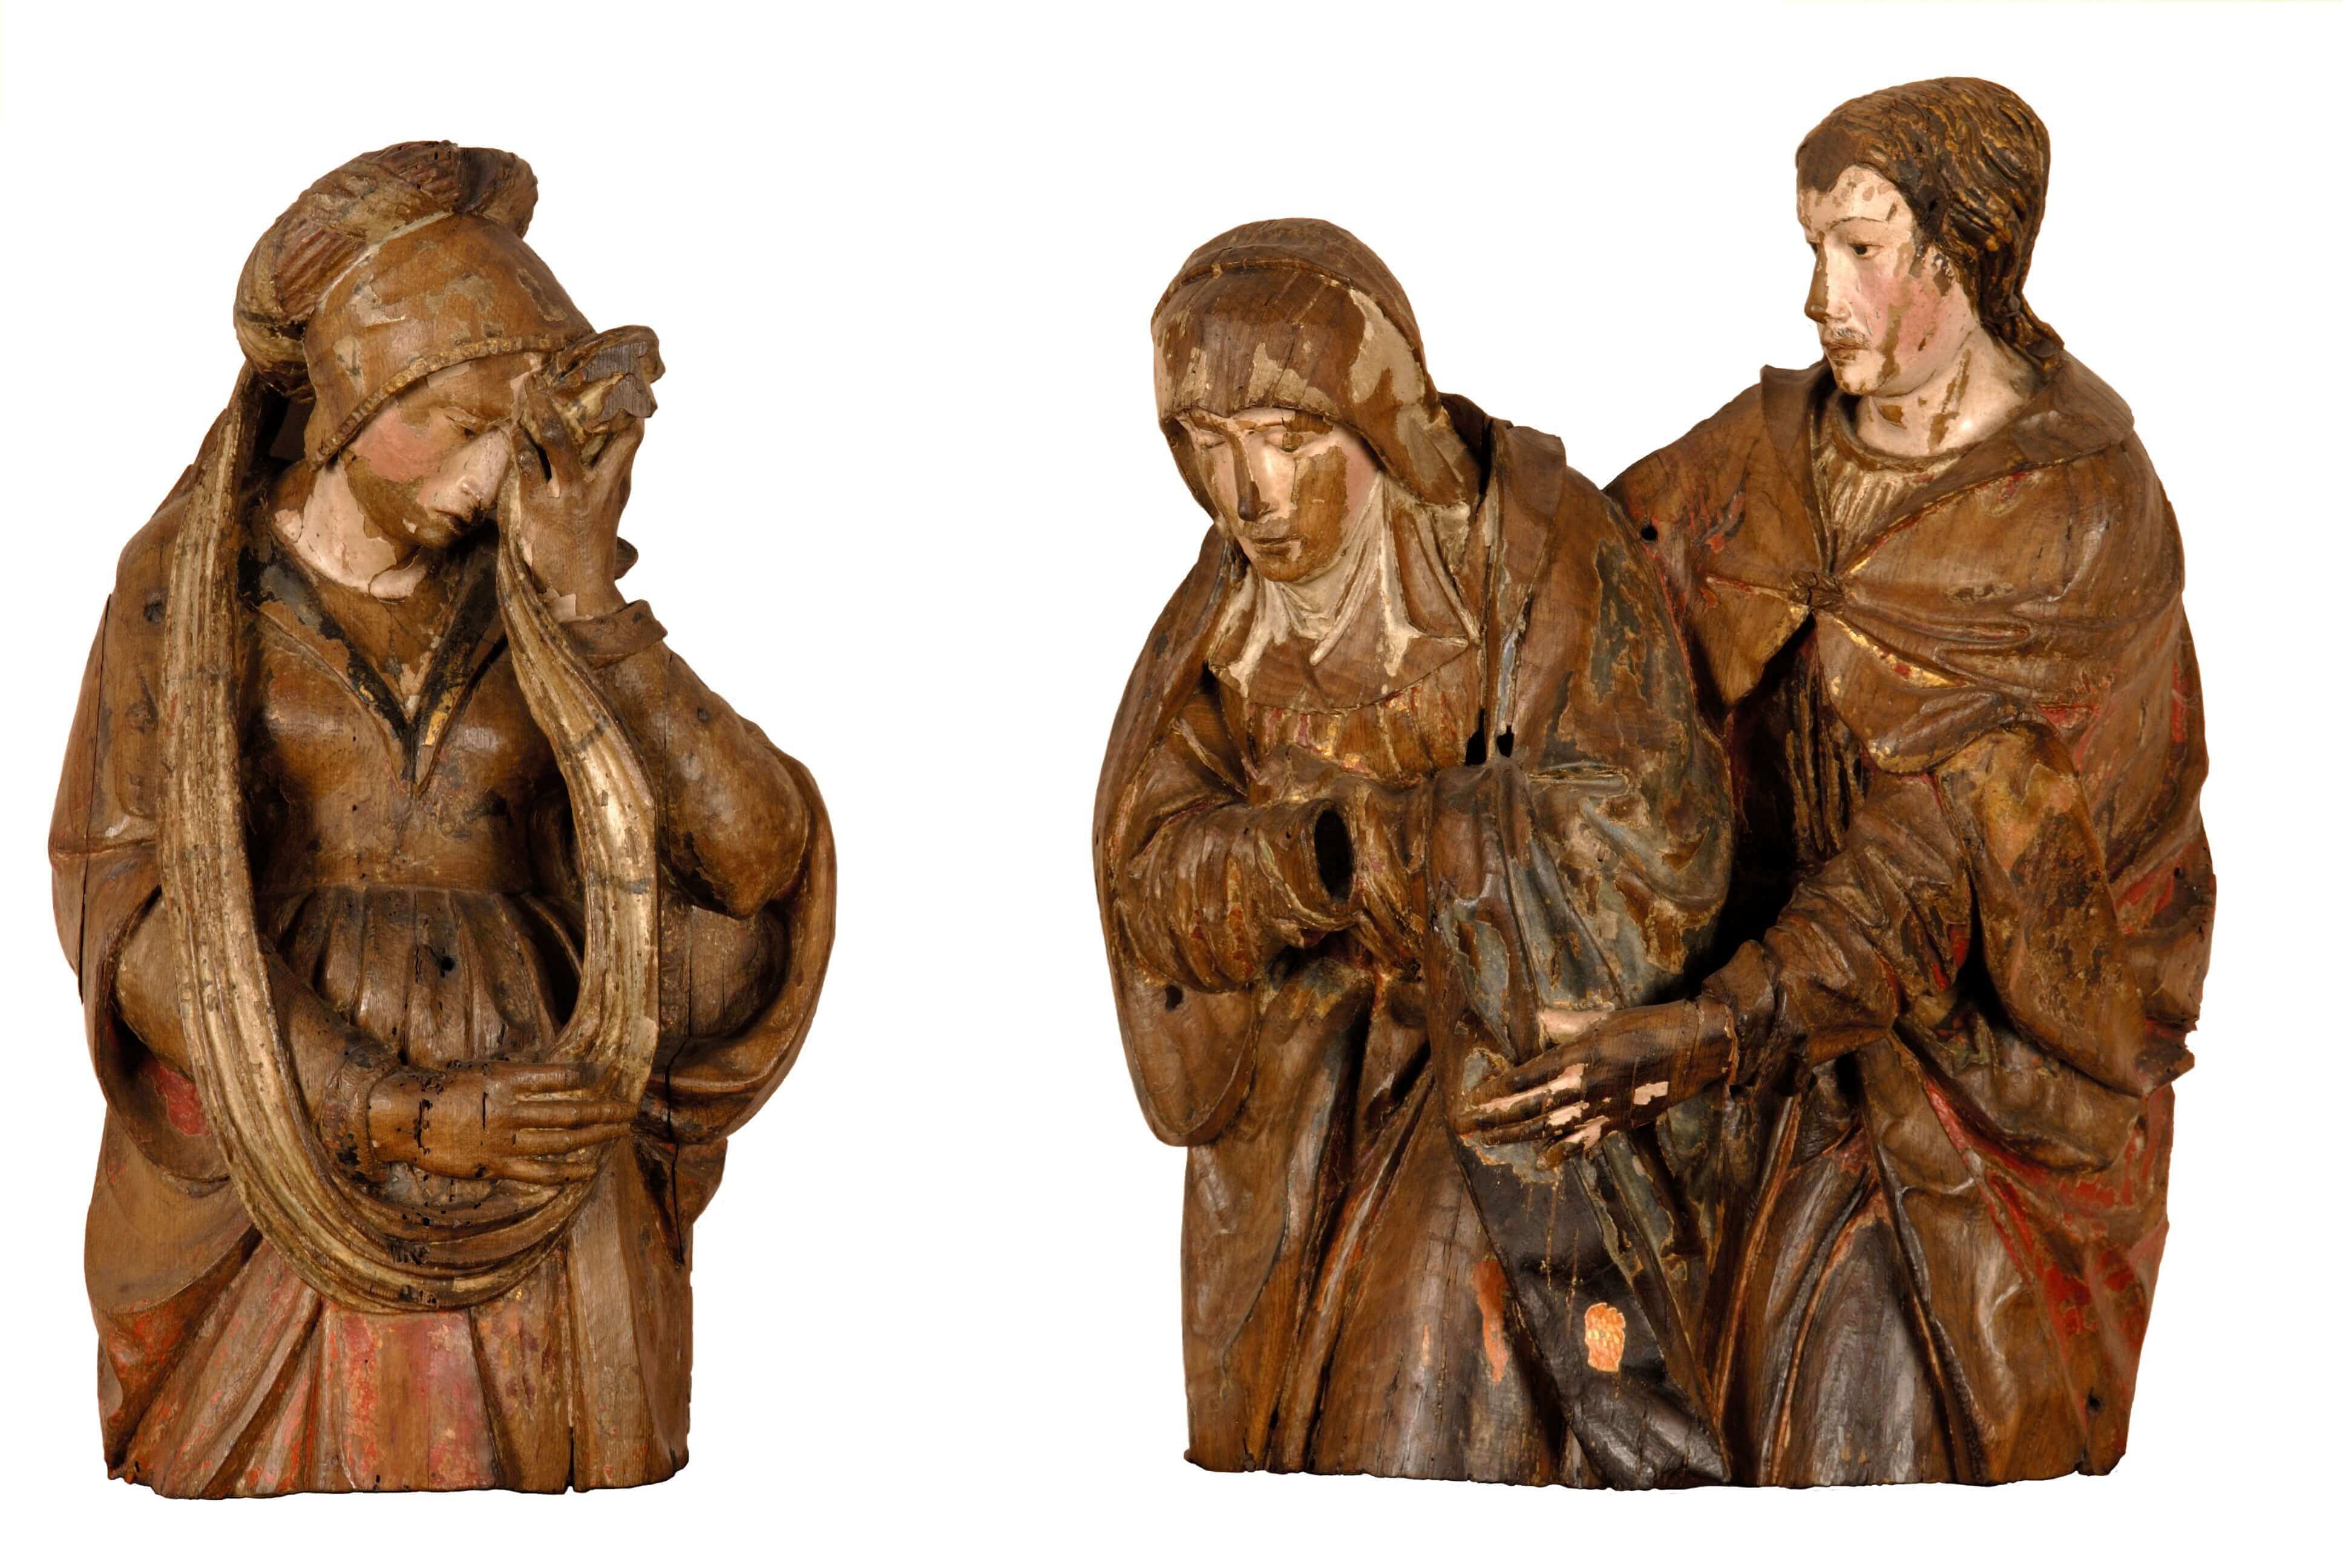 Figures of a deposition of Christ in the tomb: Mary of Clopas, Virgin Mary and Saint John